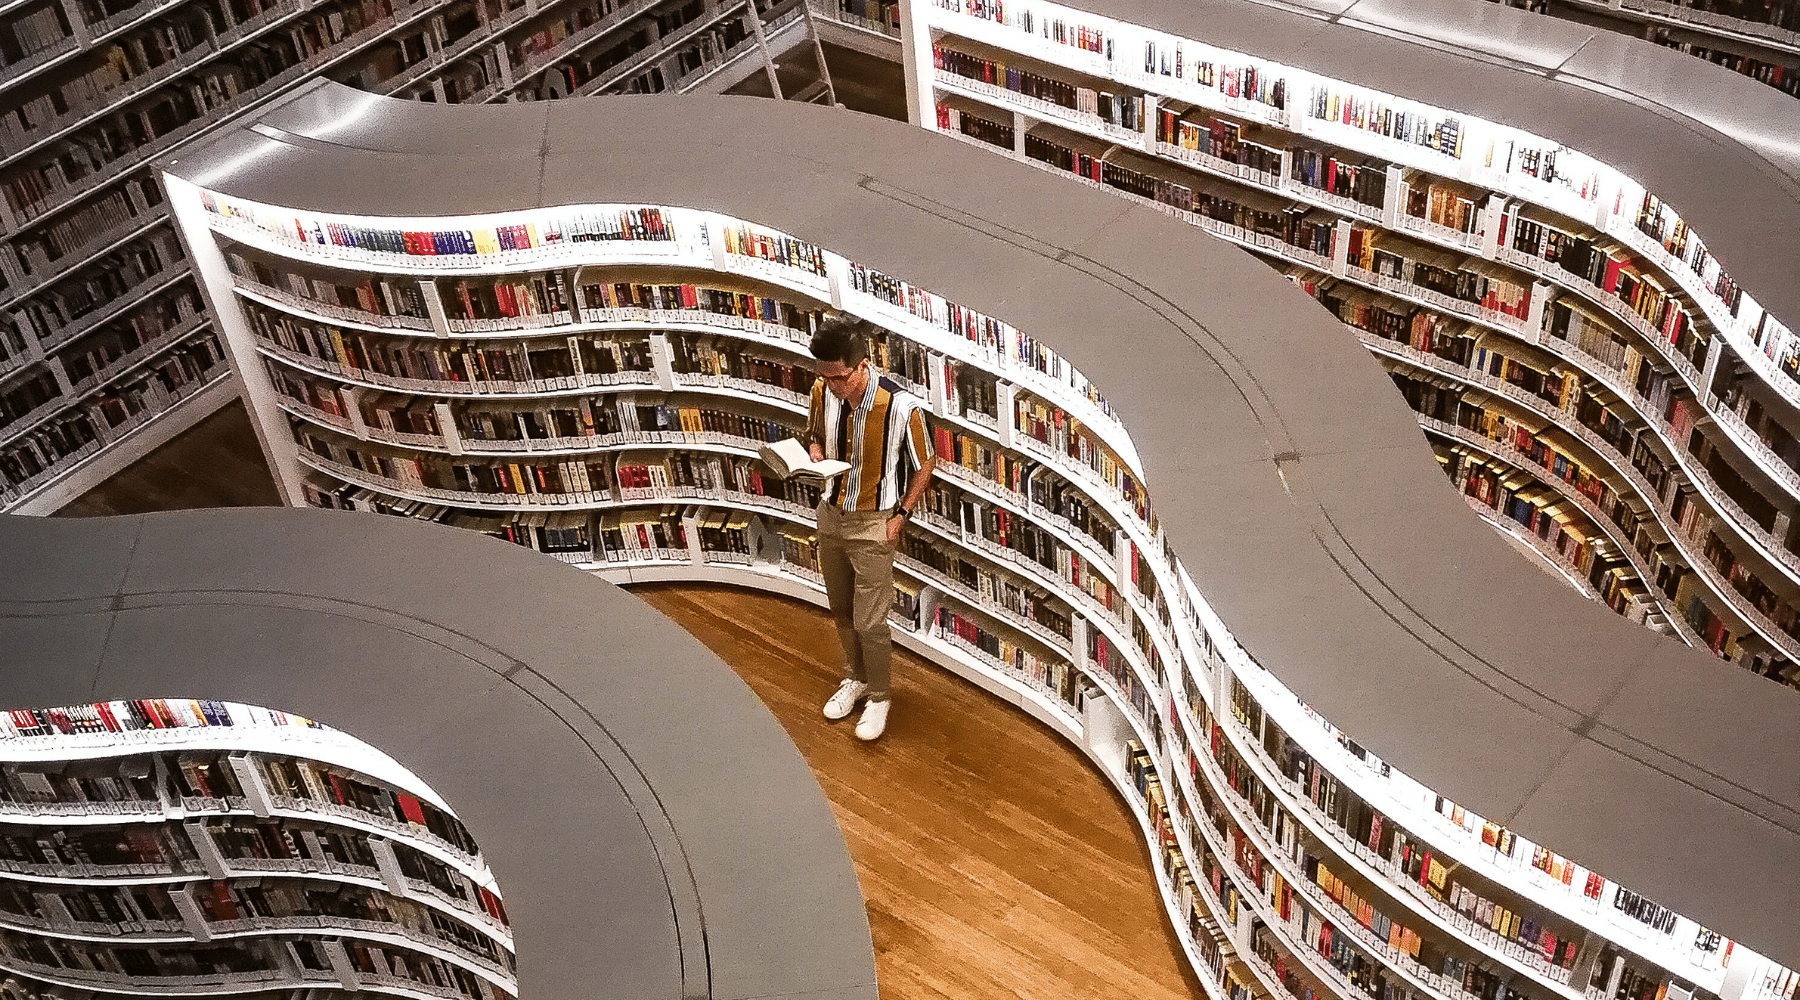 Man standing in rows of bookshelves holding book